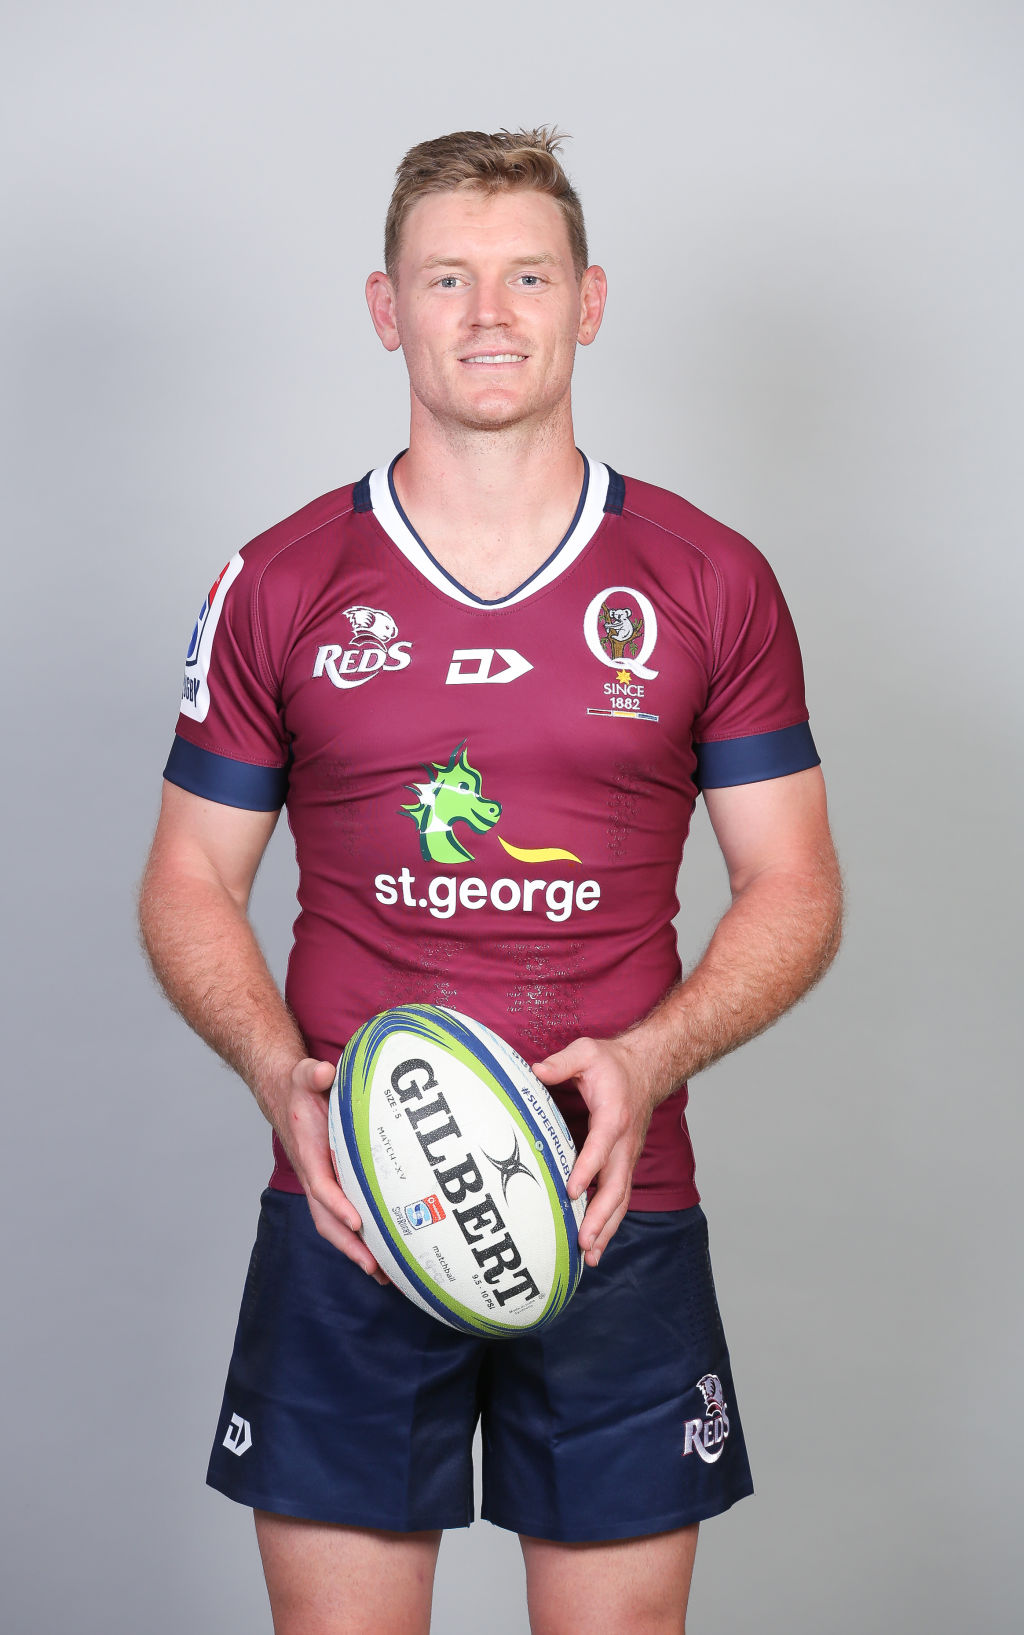 Queensland Reds player and Brisbane property investor Bryce Hegarty. Photo: Supplied